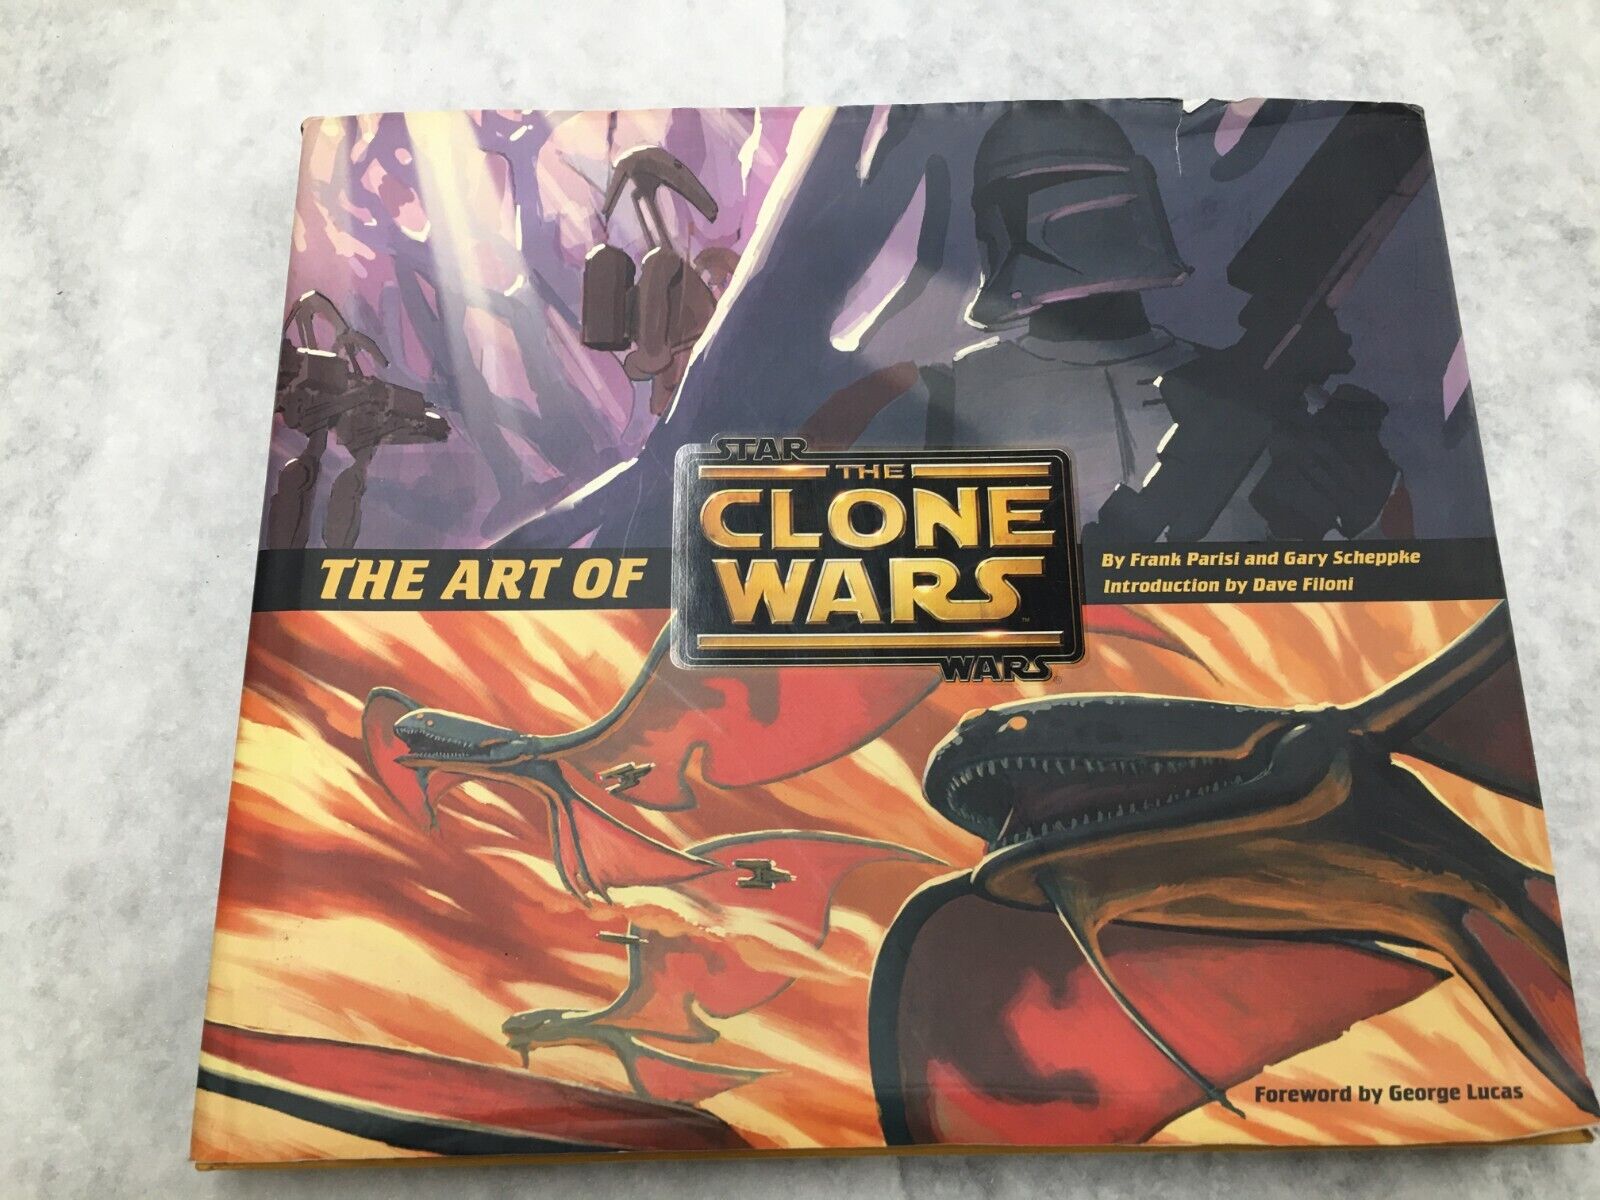 The Art of Star Wars: the Clone Wars by Gary Scheppke and Frank Parisi